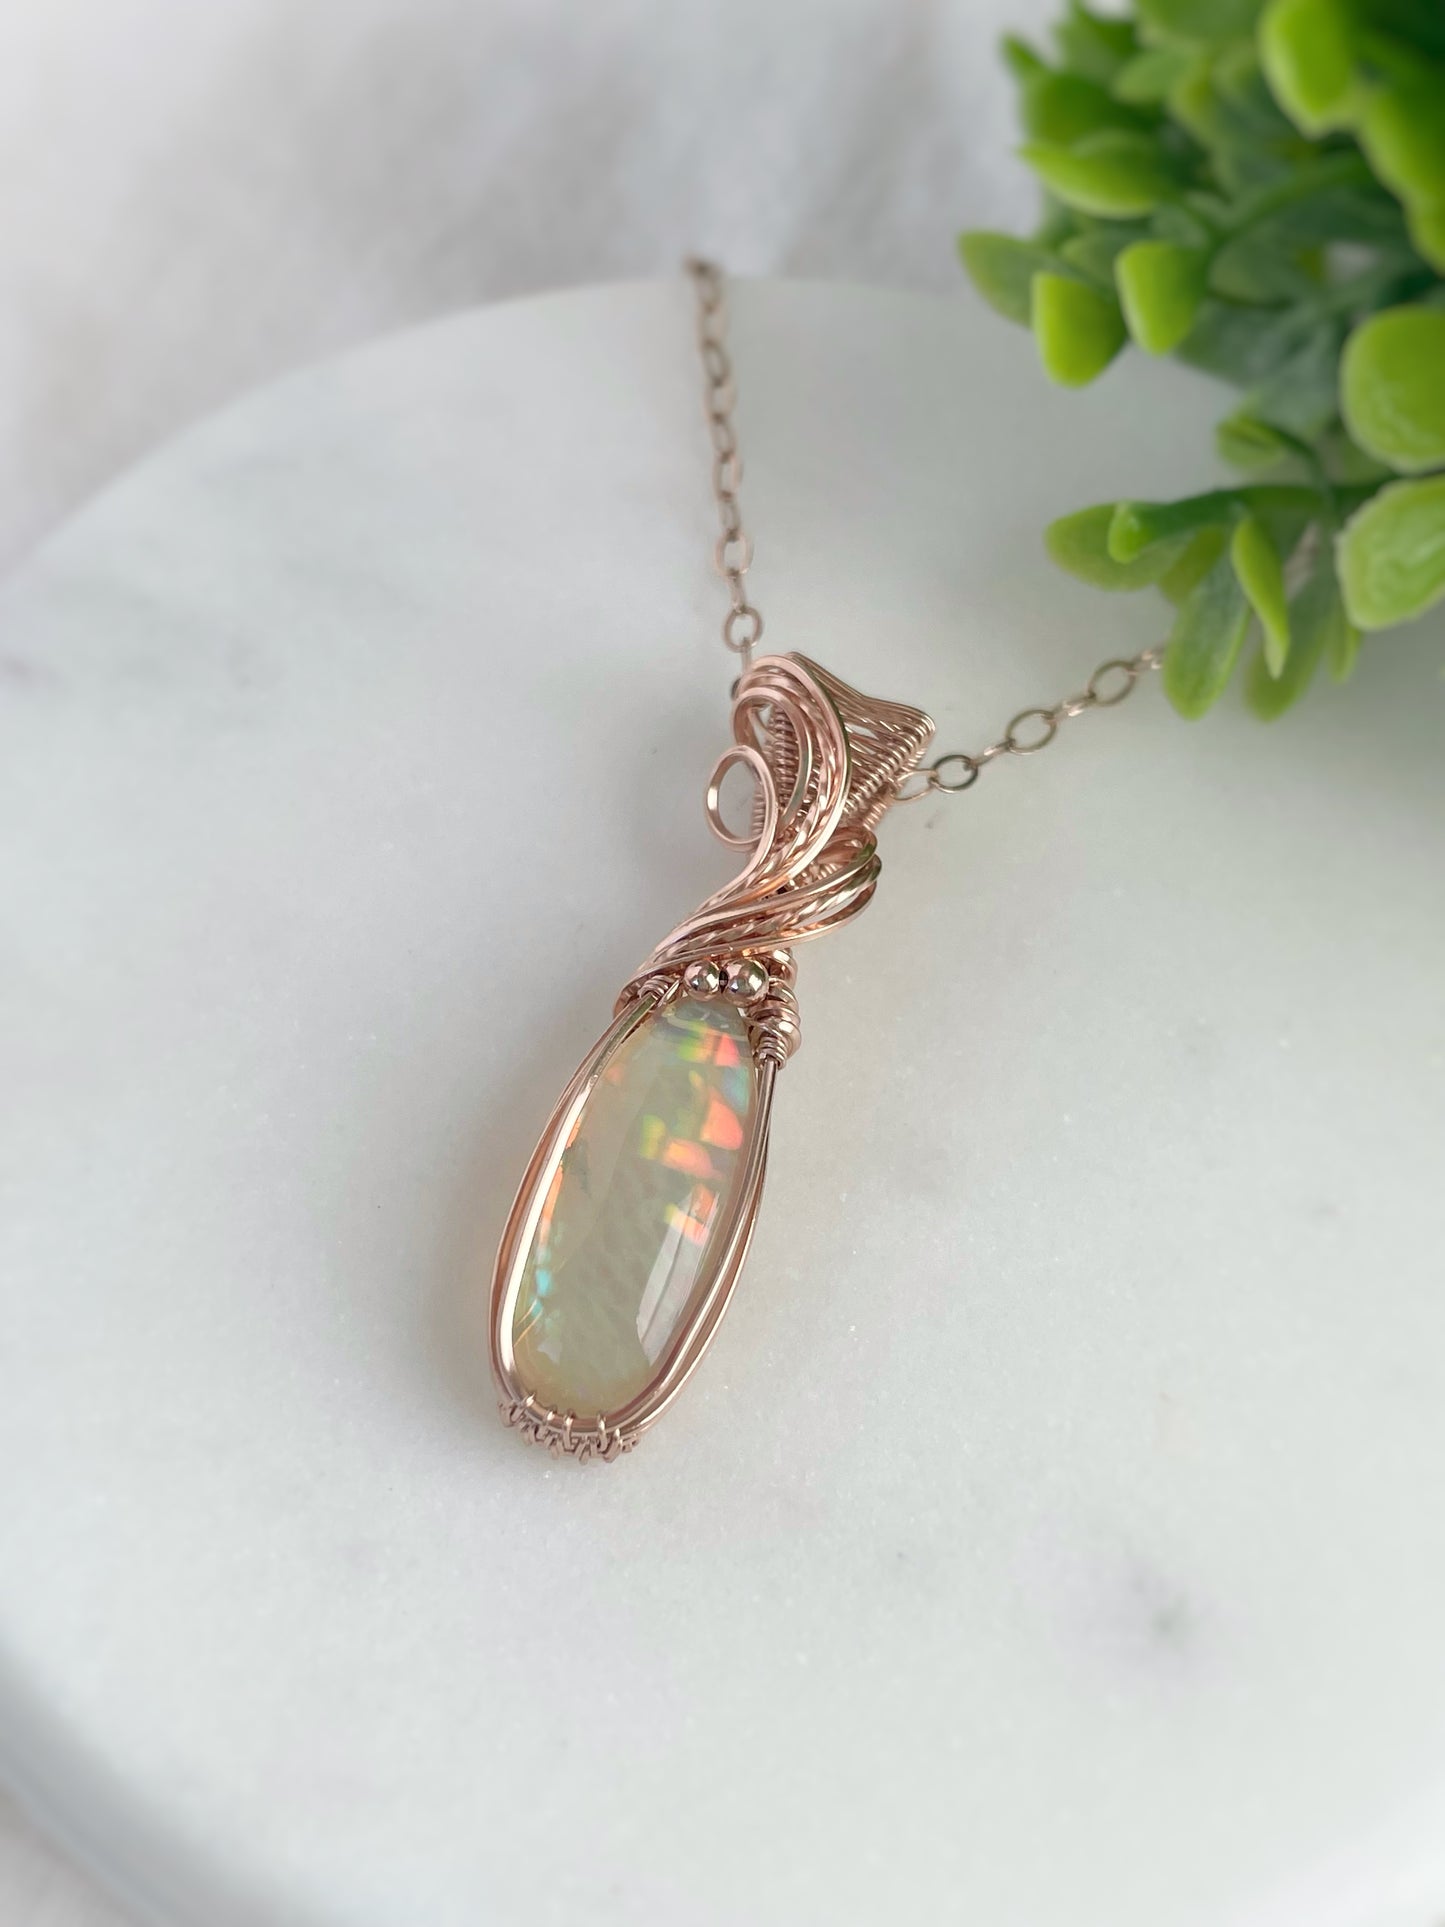 4.75ct Honeycomb Patterned Ethiopian Opal Necklace in 14k Rose Gold Filled